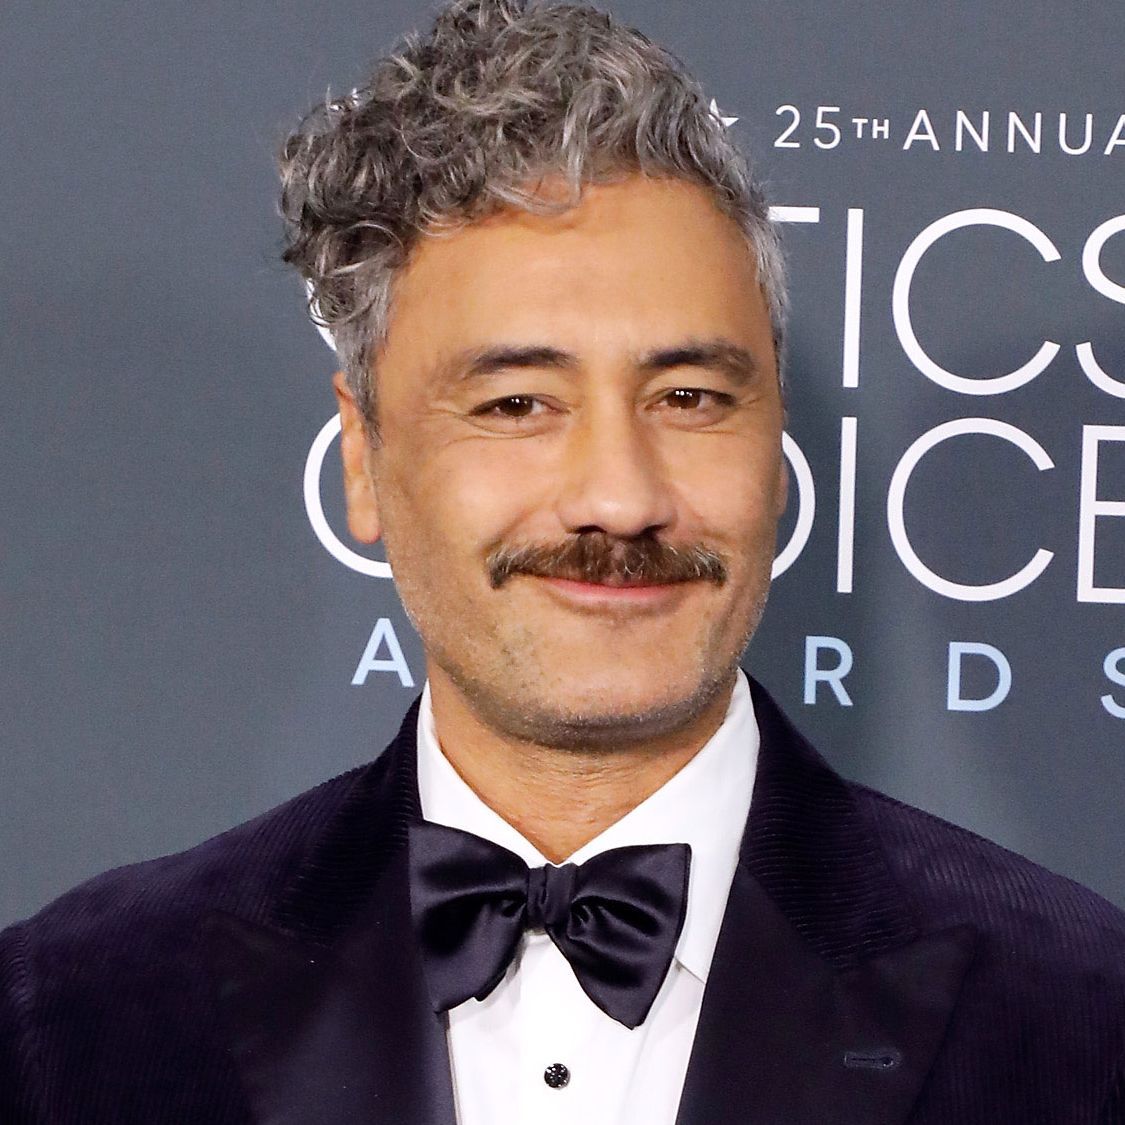 How much are Taika's approximate earnings